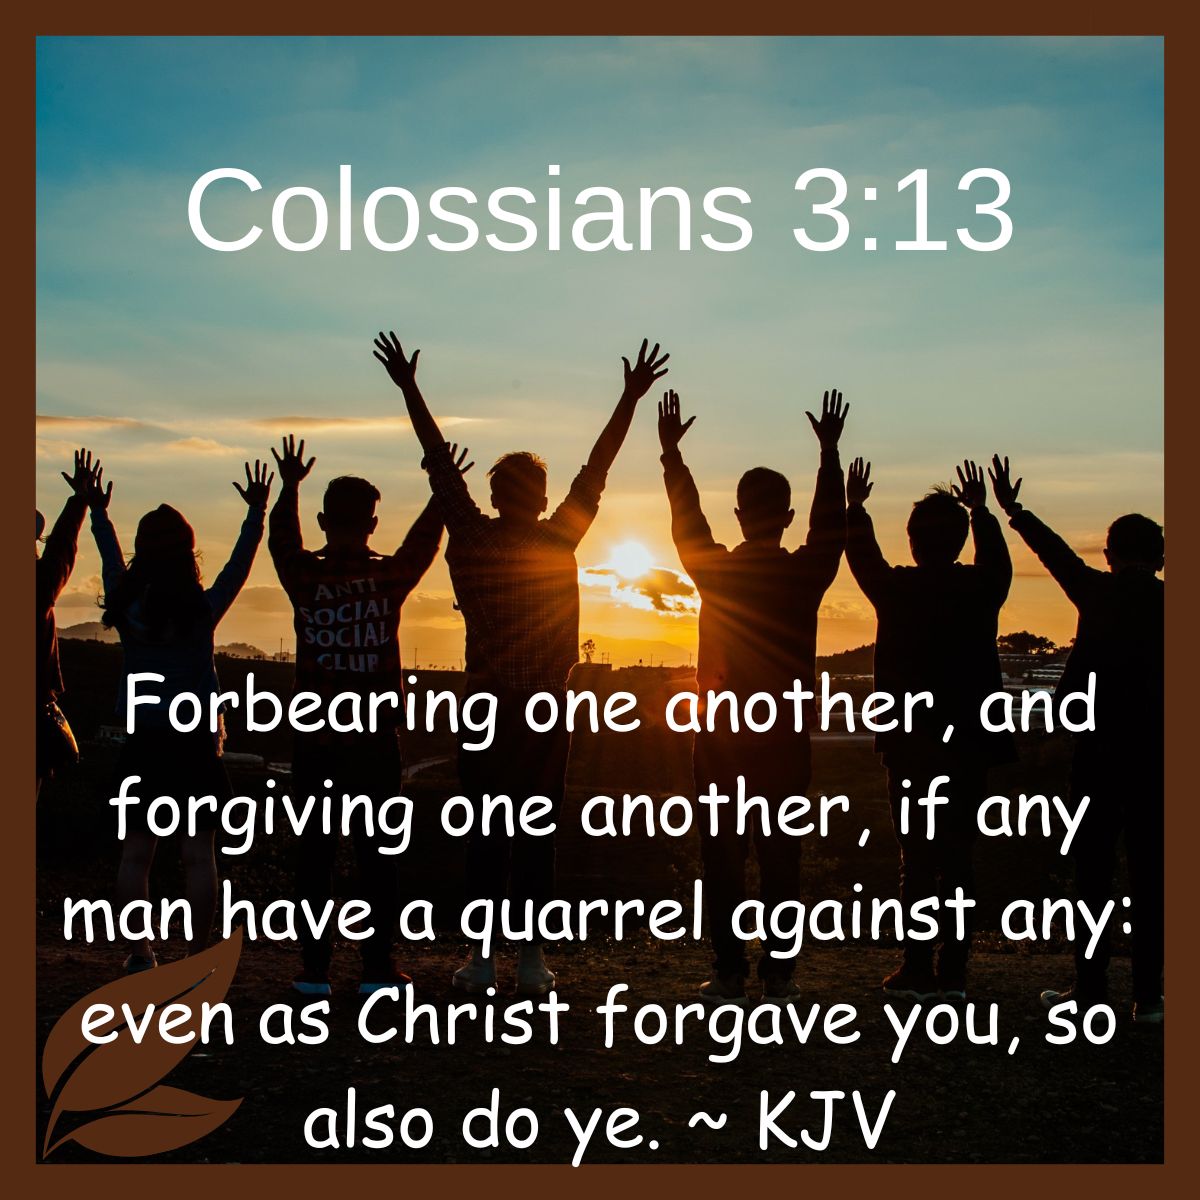  Forbearing one another, and forgiving one another, if any man have a quarrel against any: even as Christ forgave you, so also do ye. Colossians 3-13